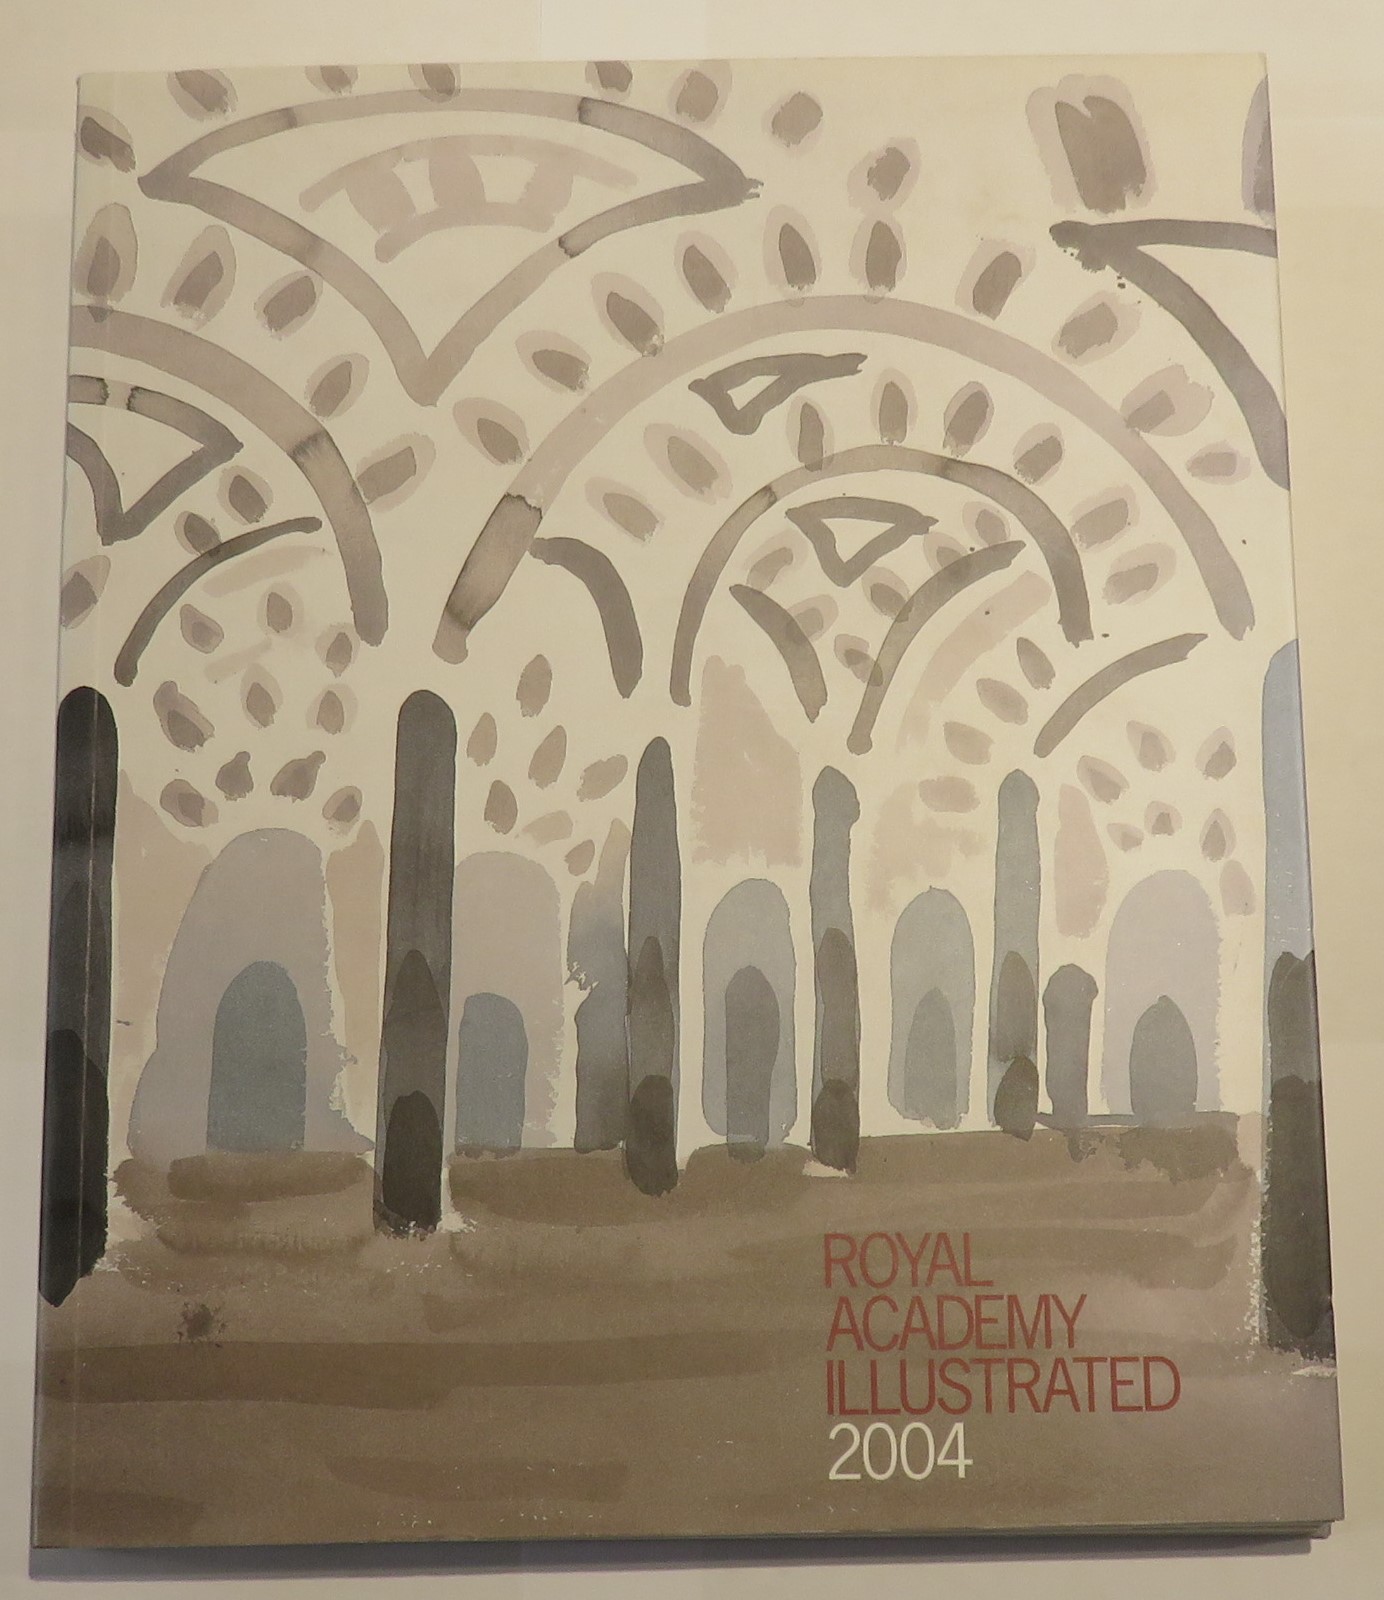 Royal Academy Illustrated 2004